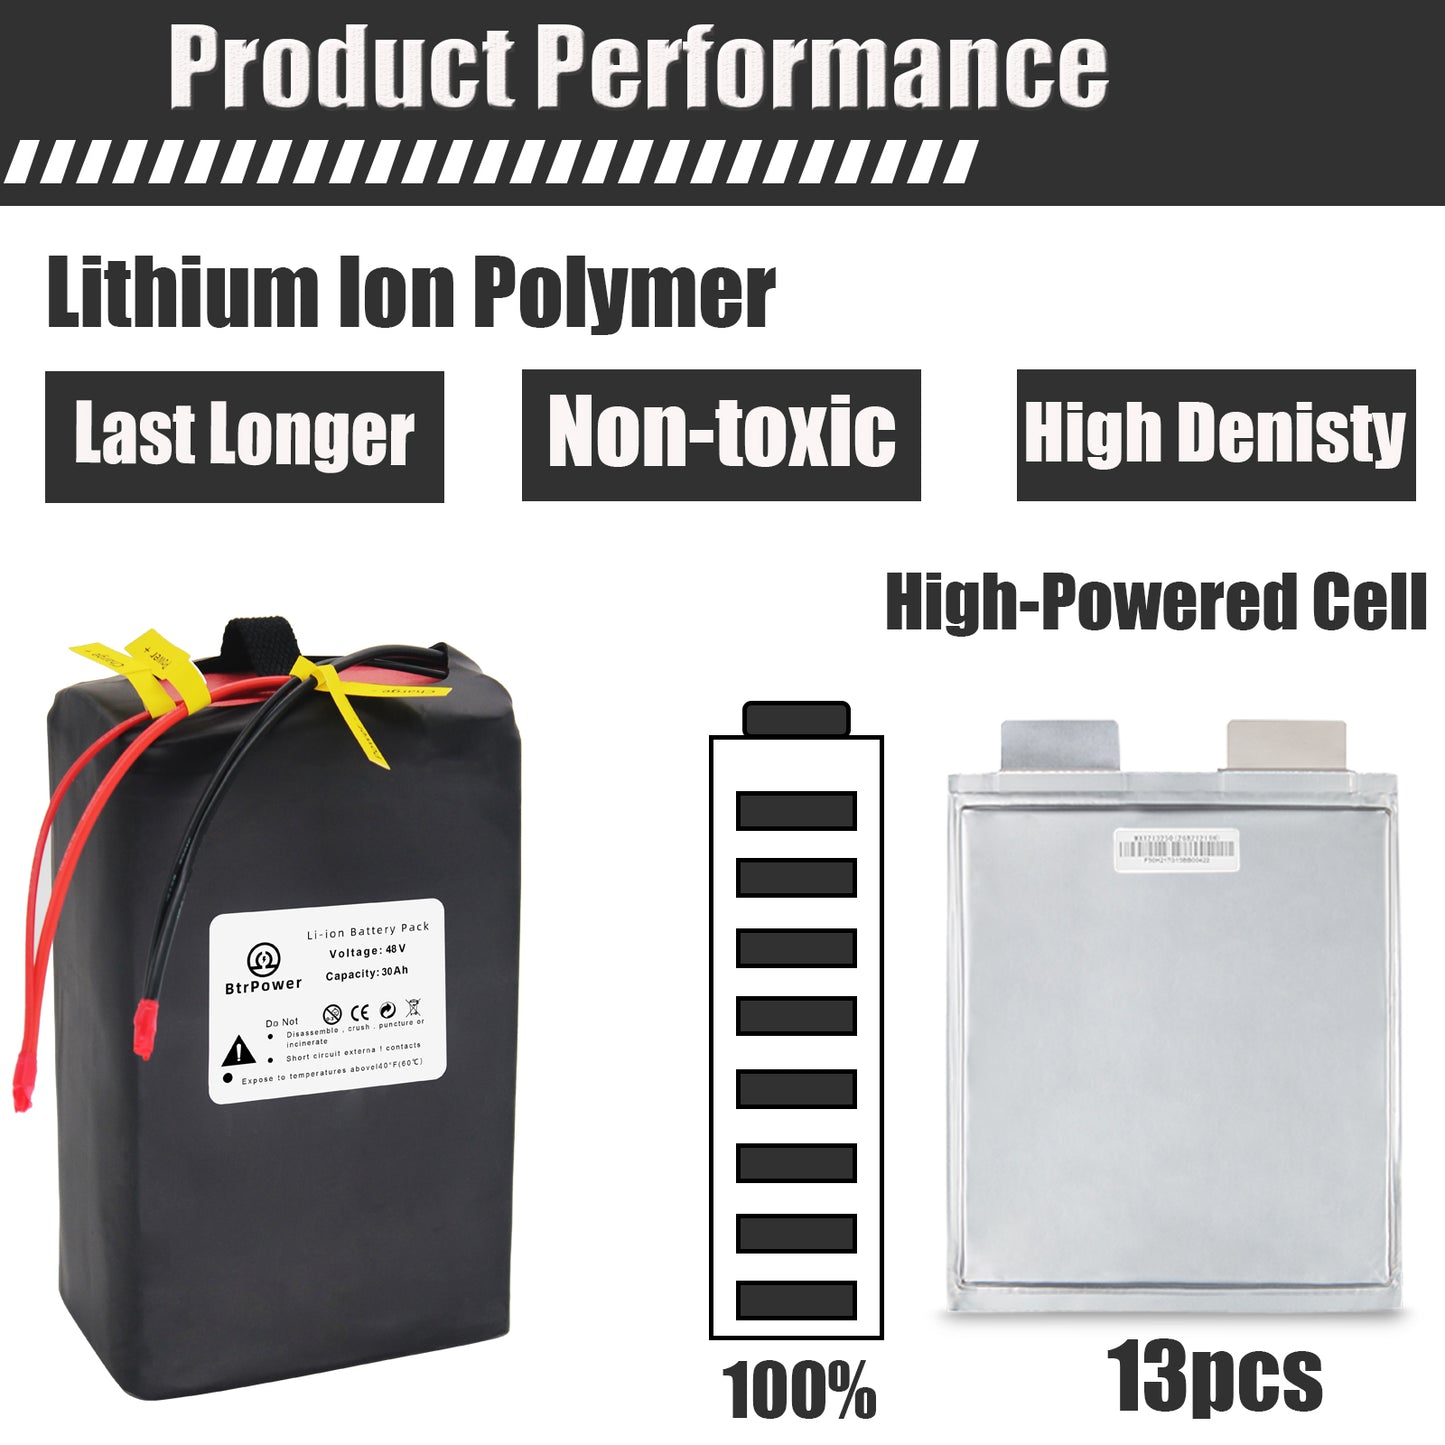 BtrPower Ebike Battery 48V 30AH Li-ion Battery Pack with 5A Charger, 50A BMS